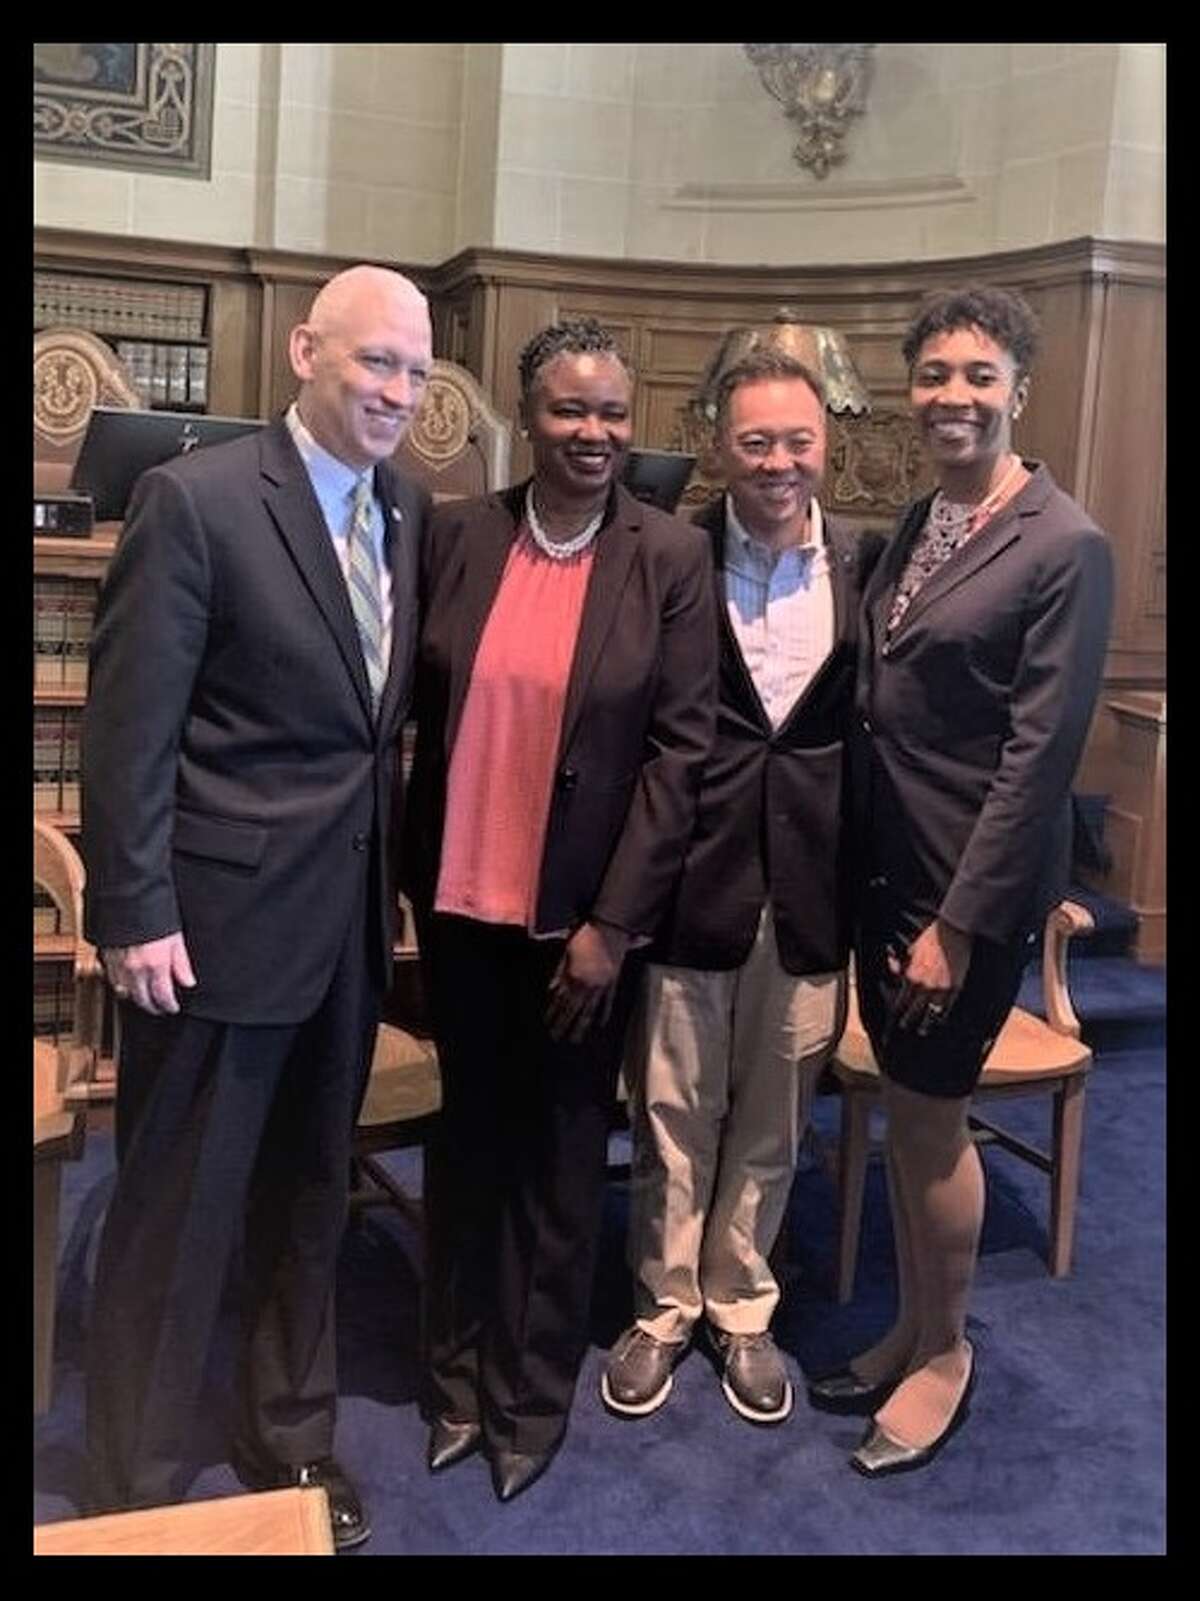 Chief State's Attorney Patrick J. Griffin is pictured here with TaShun Bowden-Lewis, Connecticut’s sixth Chief Public Defender, Connecticut Attorney General William Tong and U.S. Attorney Vanessa Roberts Avery. The photo was taken following the July 14, 2022 swearing-in ceremony for Chief Public Defender Bowden-Lewis at the Connecticut Supreme Court in Hartford. 